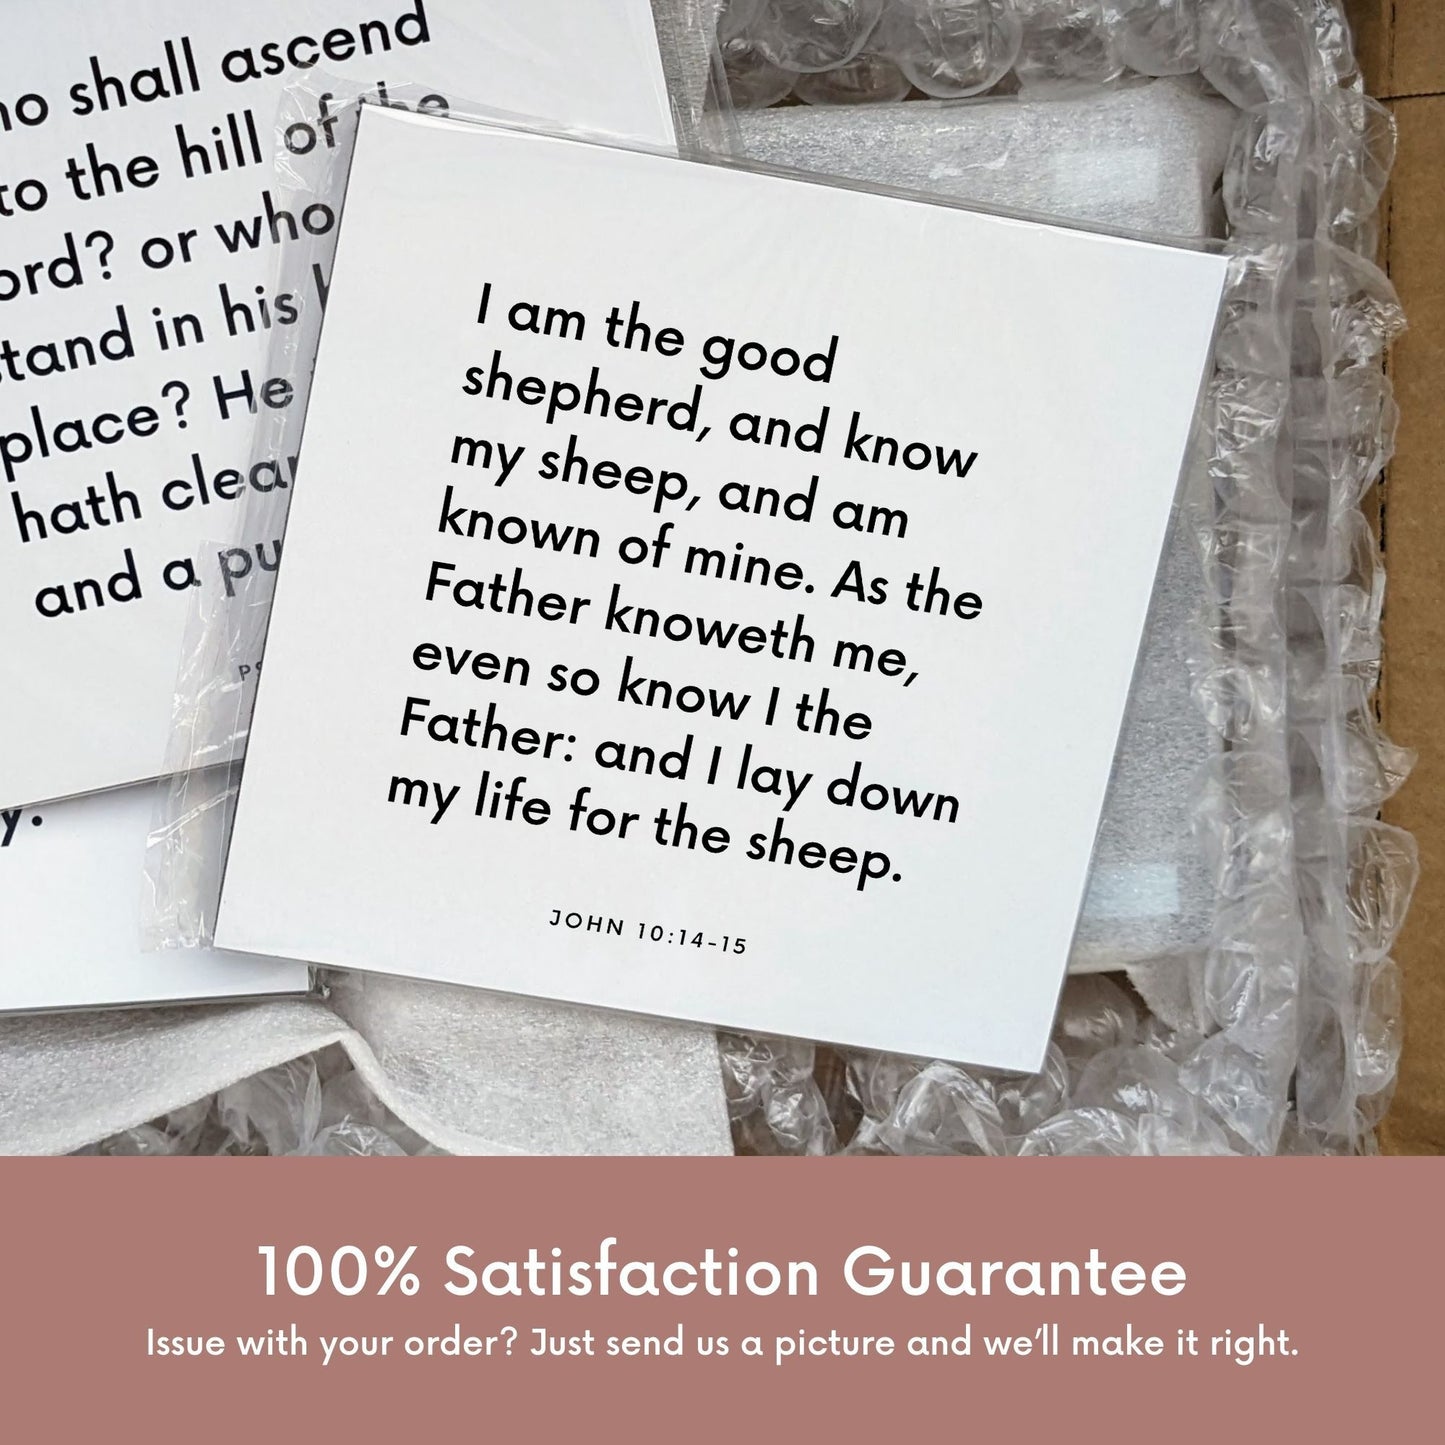 Shipping materials for scripture tile of John 10:14-15 - "I am the good shepherd, and know my sheep"